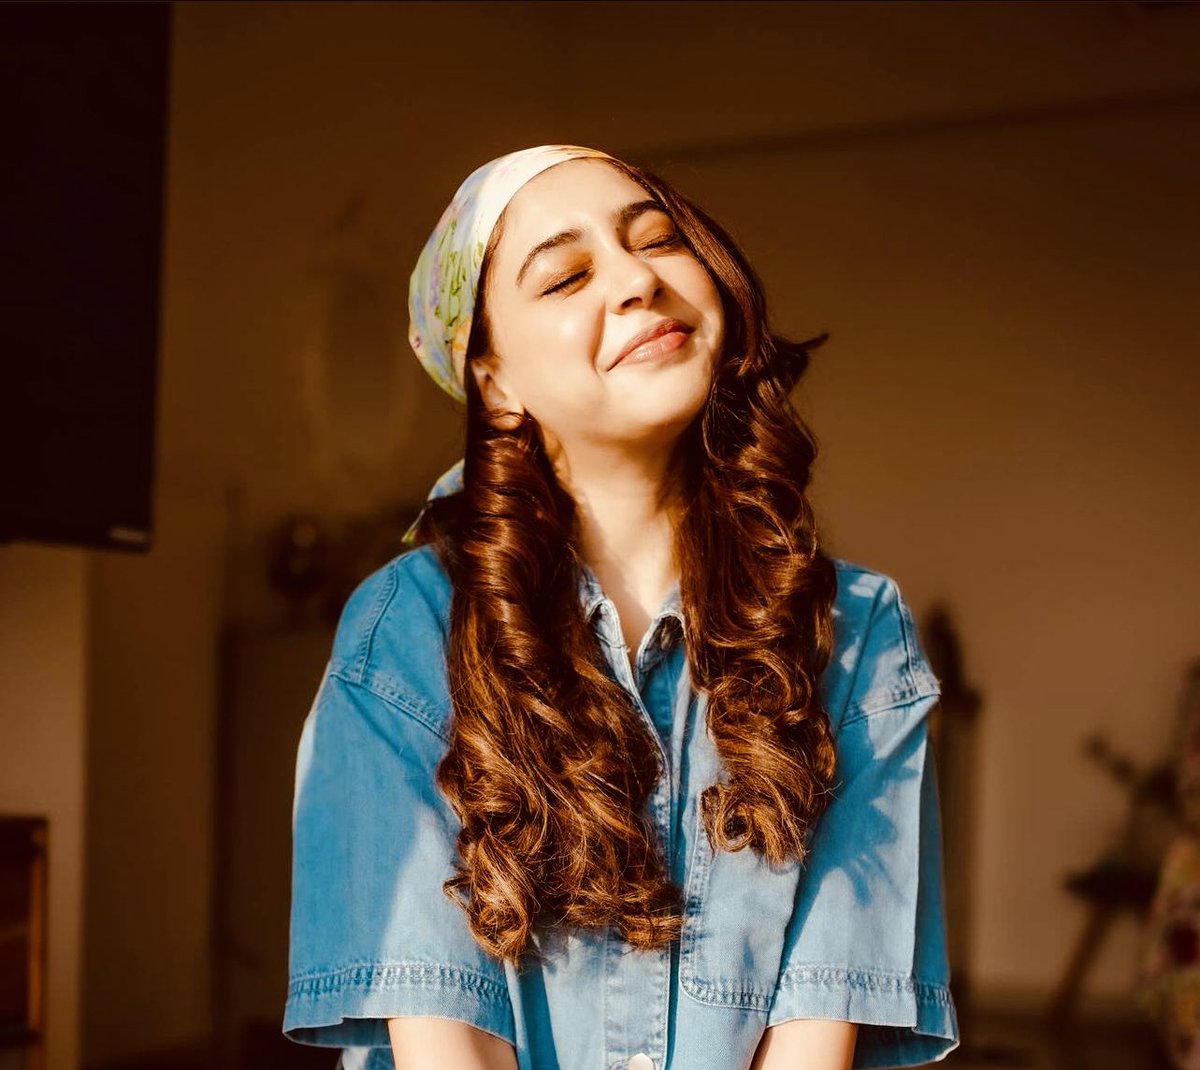 Drowning on one of the cutest smiles🥹
#NitiTaylor